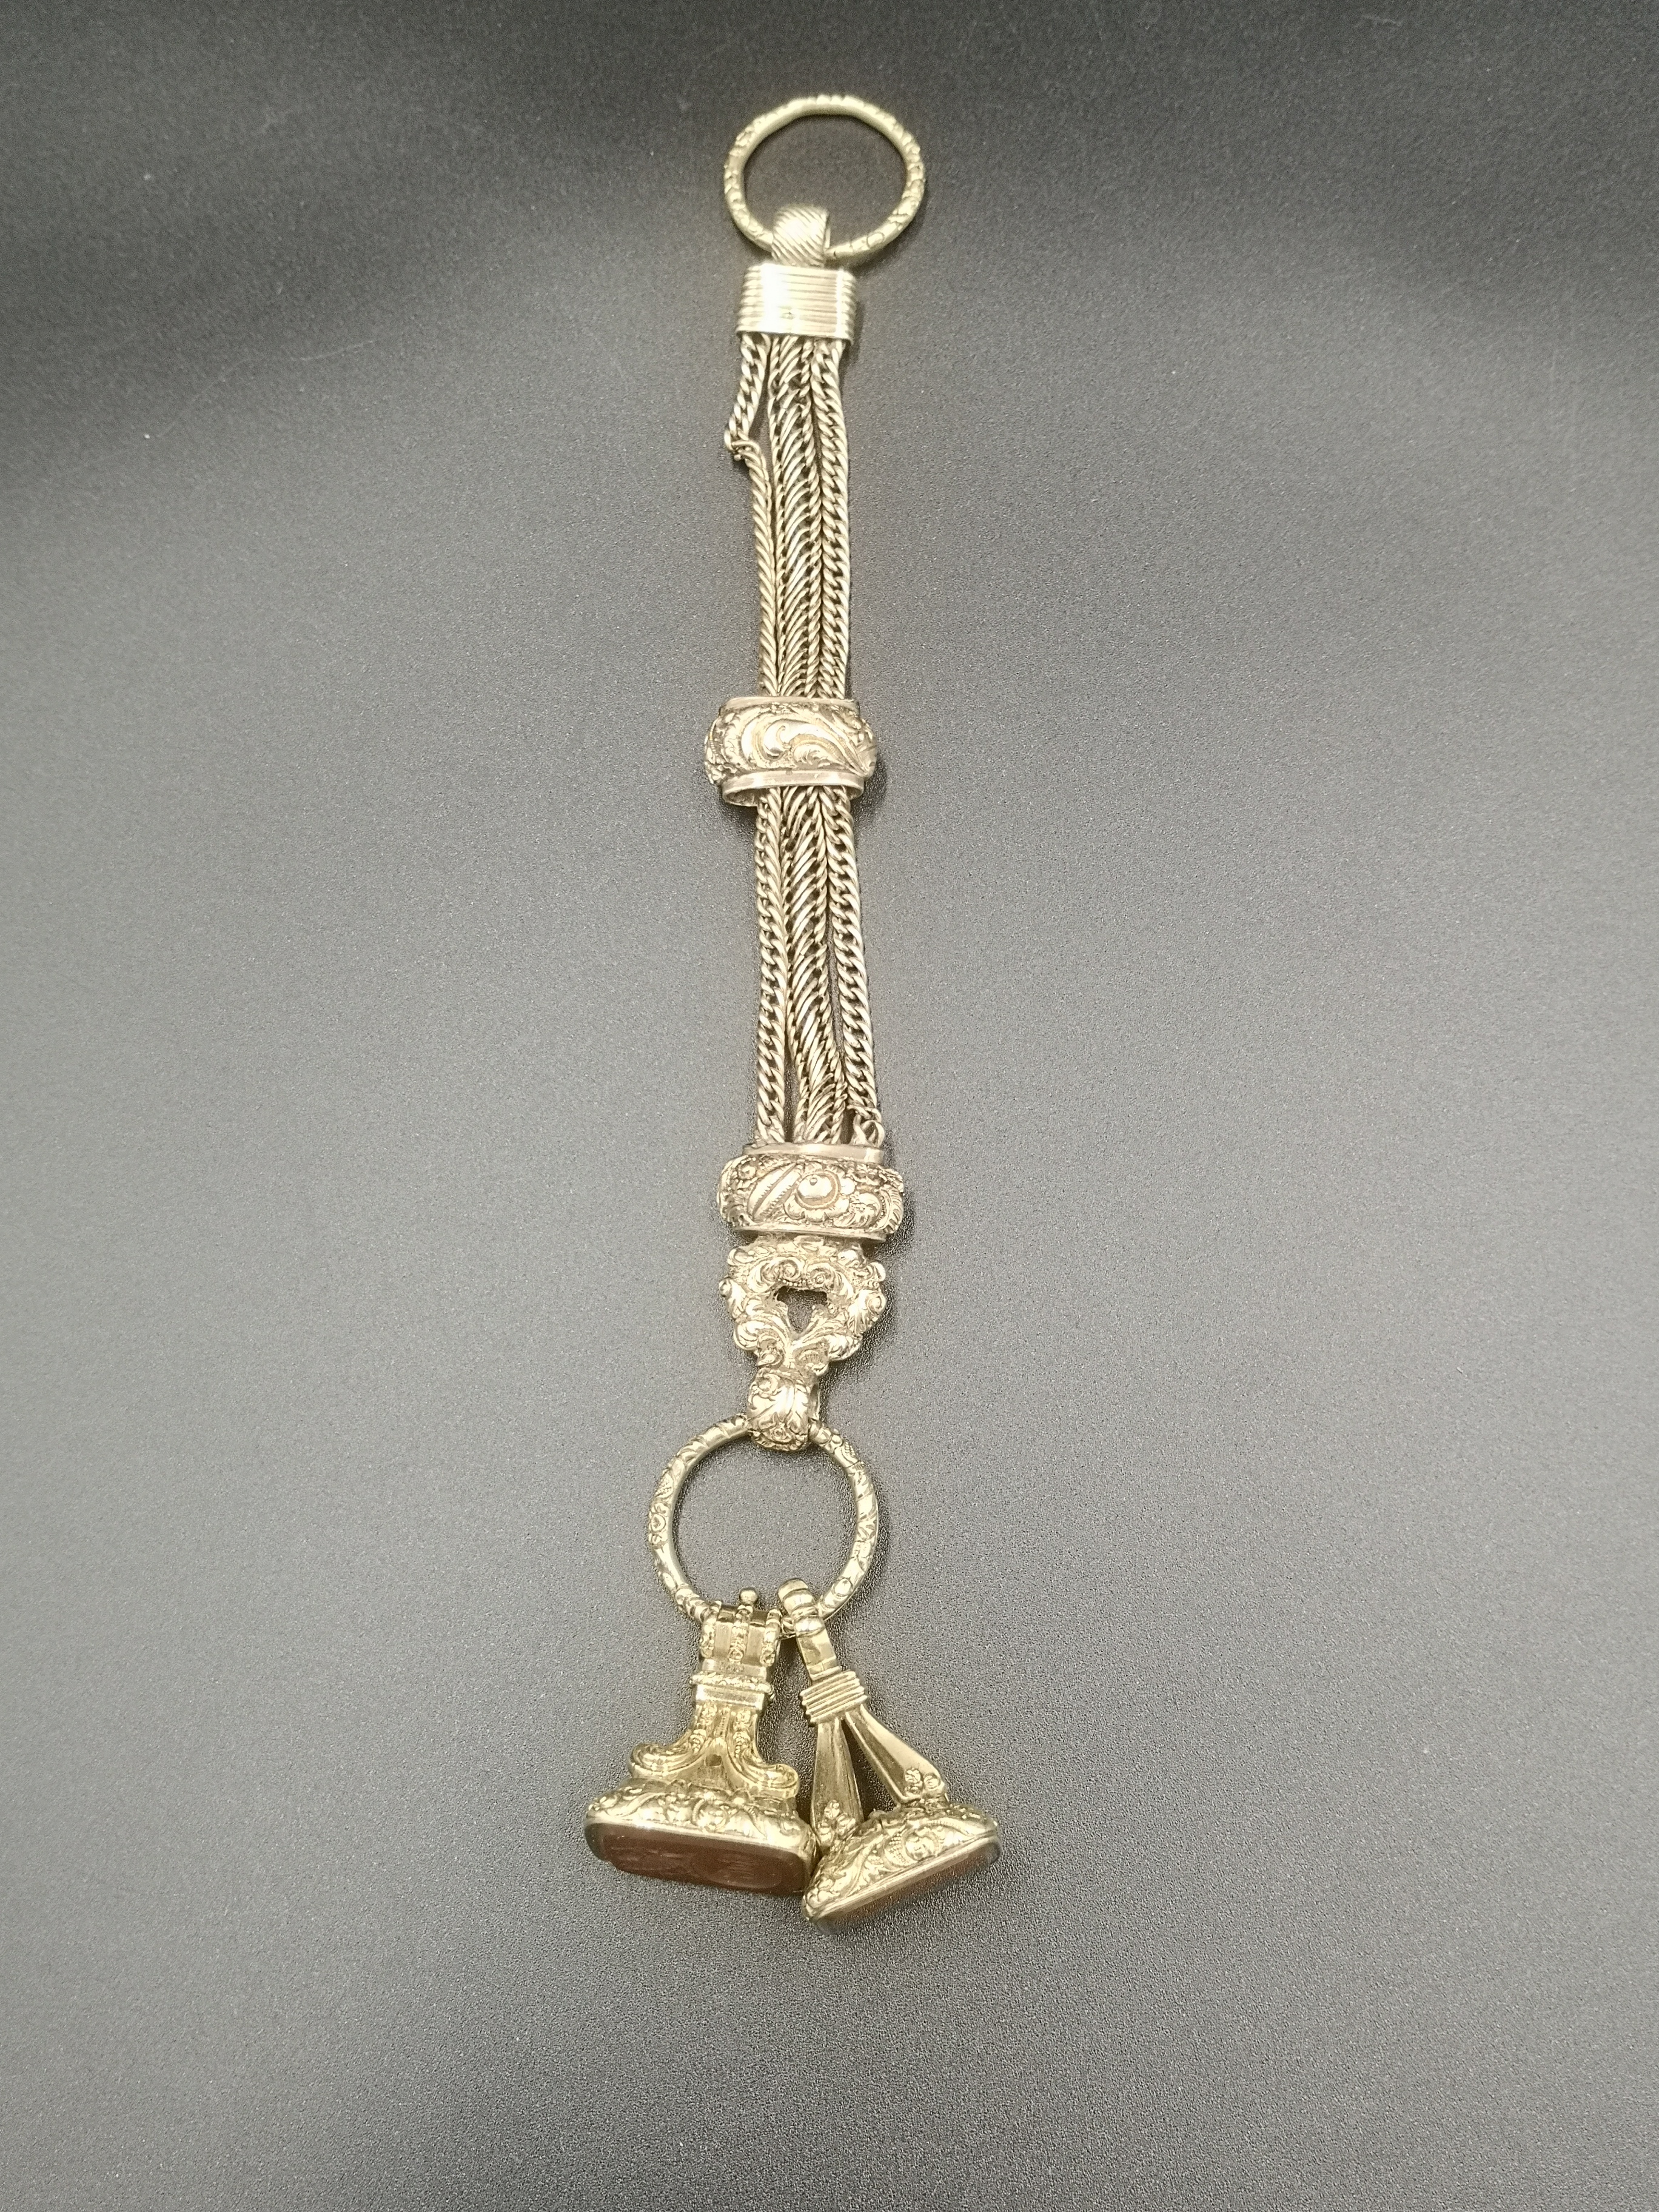 Gold fob chain with two seals - Image 6 of 8